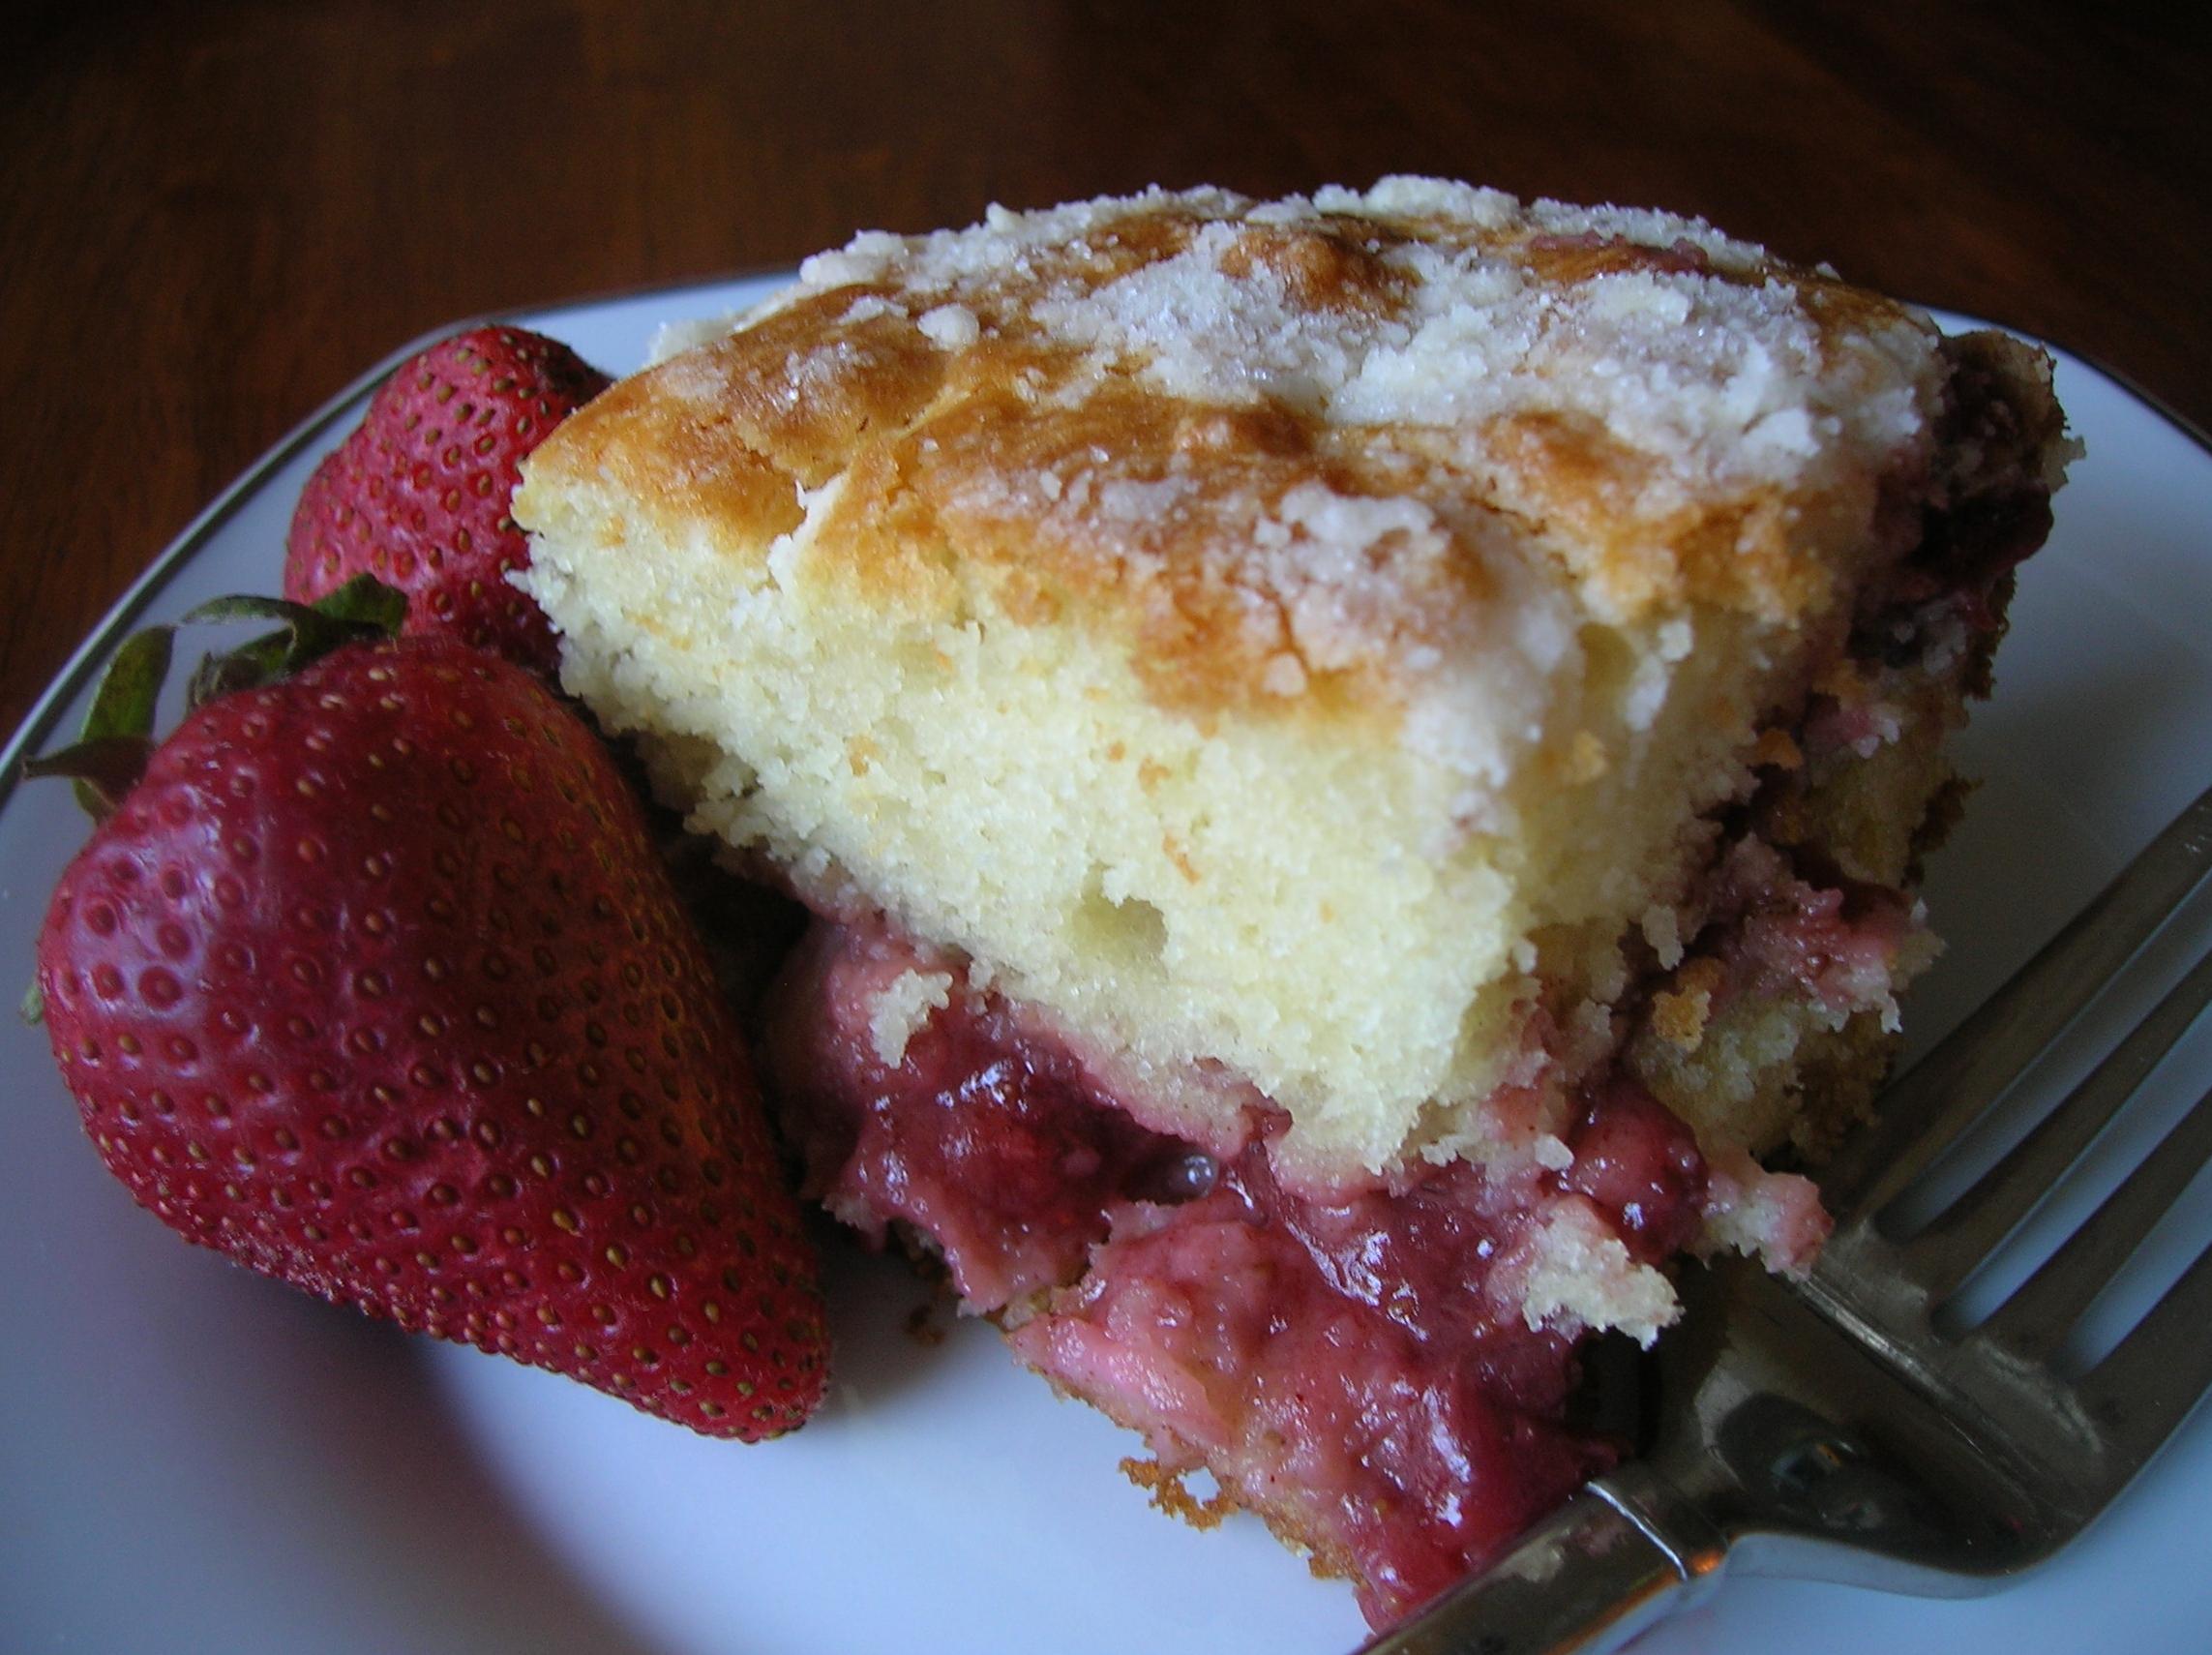  Here's a sweet treat to share with friends and family. Your loved ones will love this Strawberry Almond Coffee Cake.